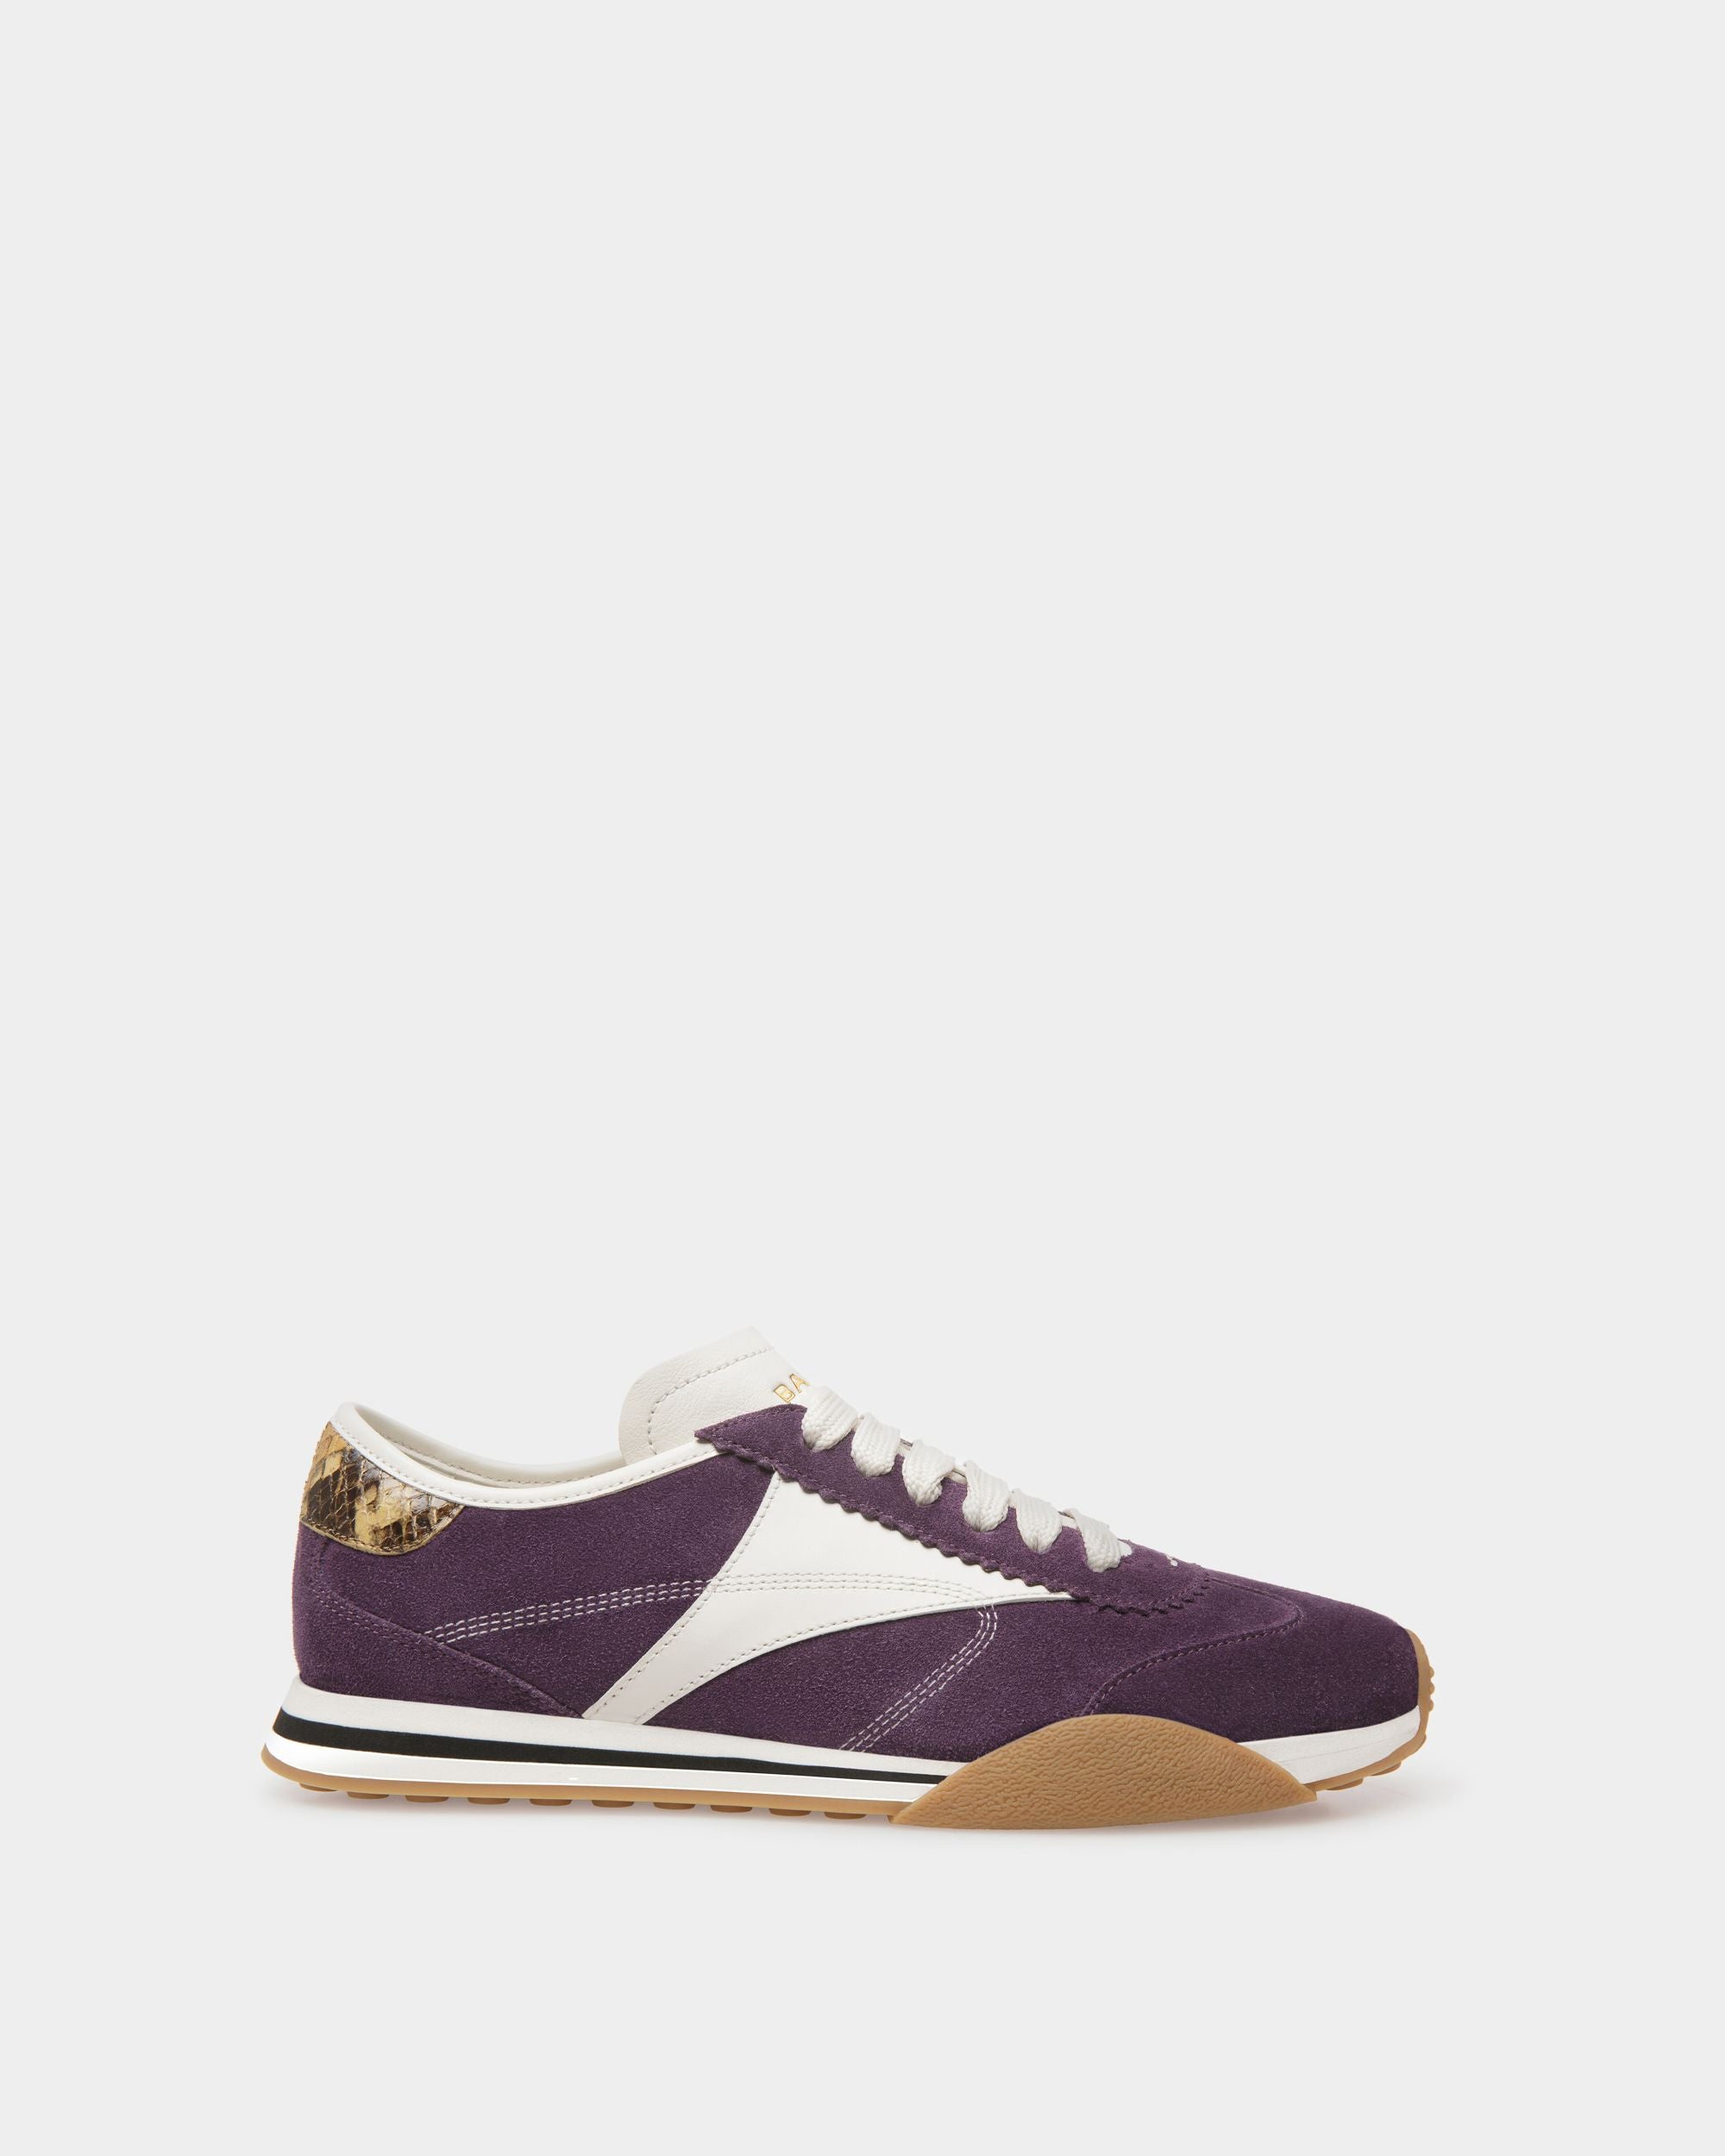 Sonney | Women's Sneakers | Orchid And White Leather | Bally | Still Life Side